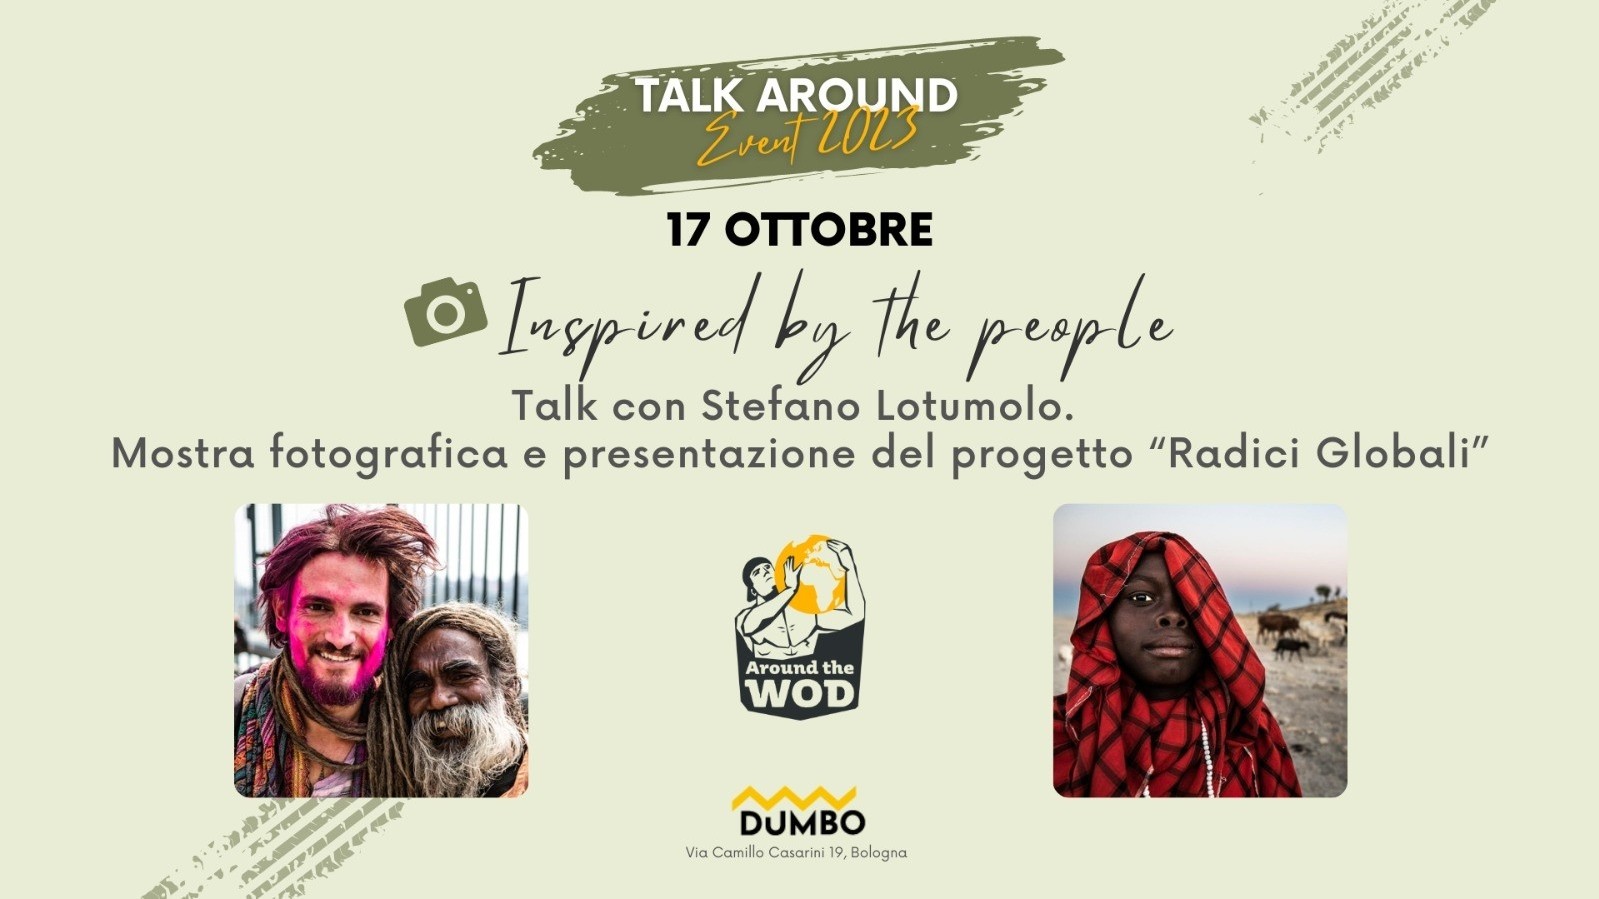 #Talkaround - "Inspired by the People" Talk con Stefano Lotumolo